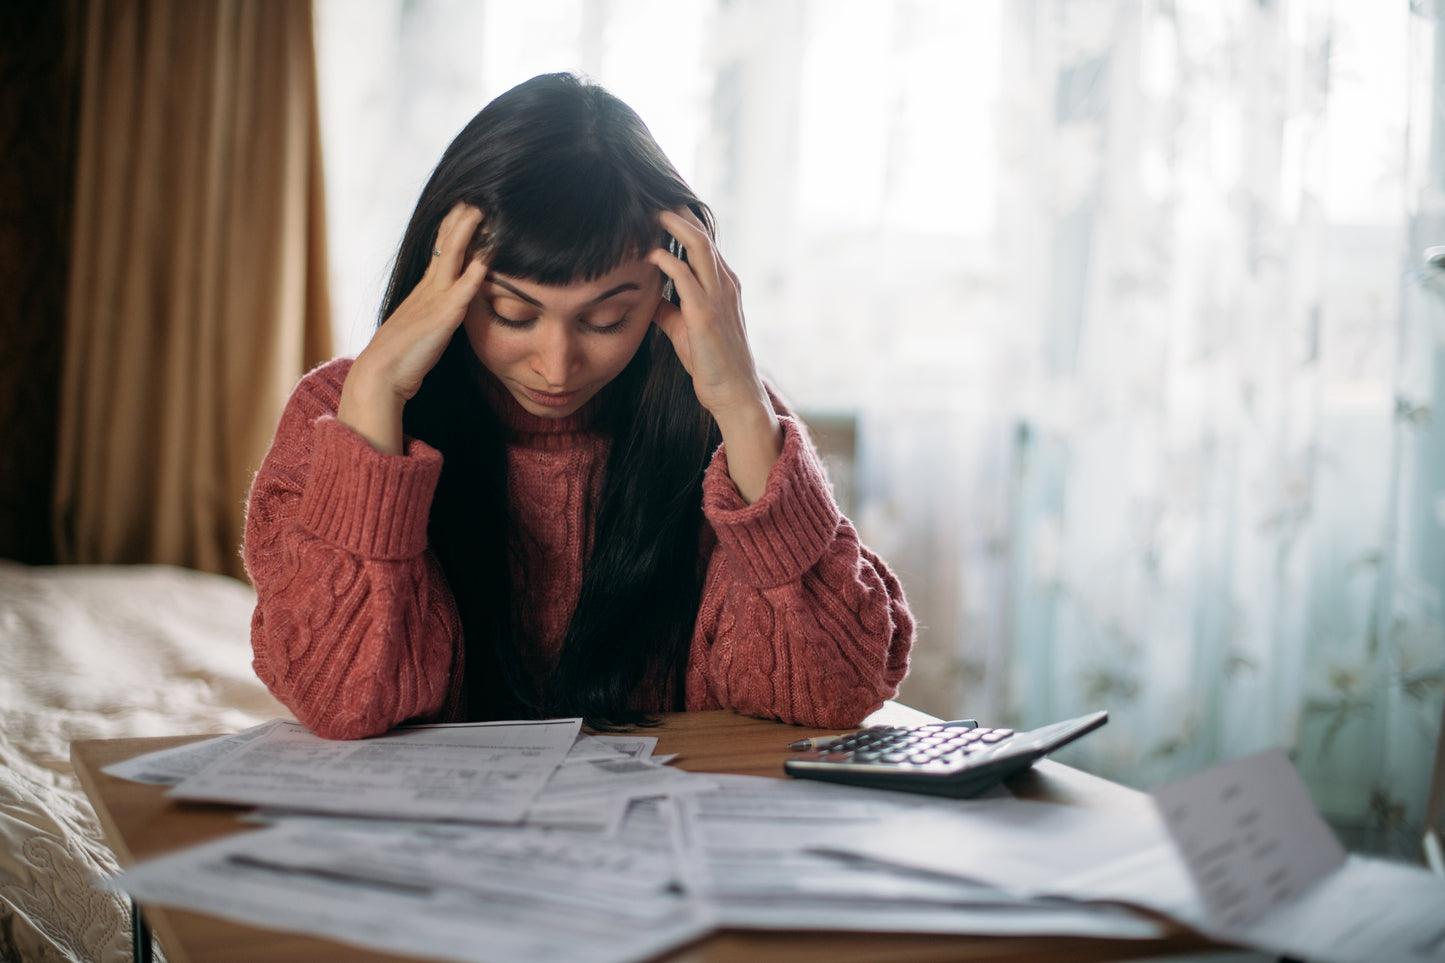 Woman looking distressed sat at a table with papers and a calculator.